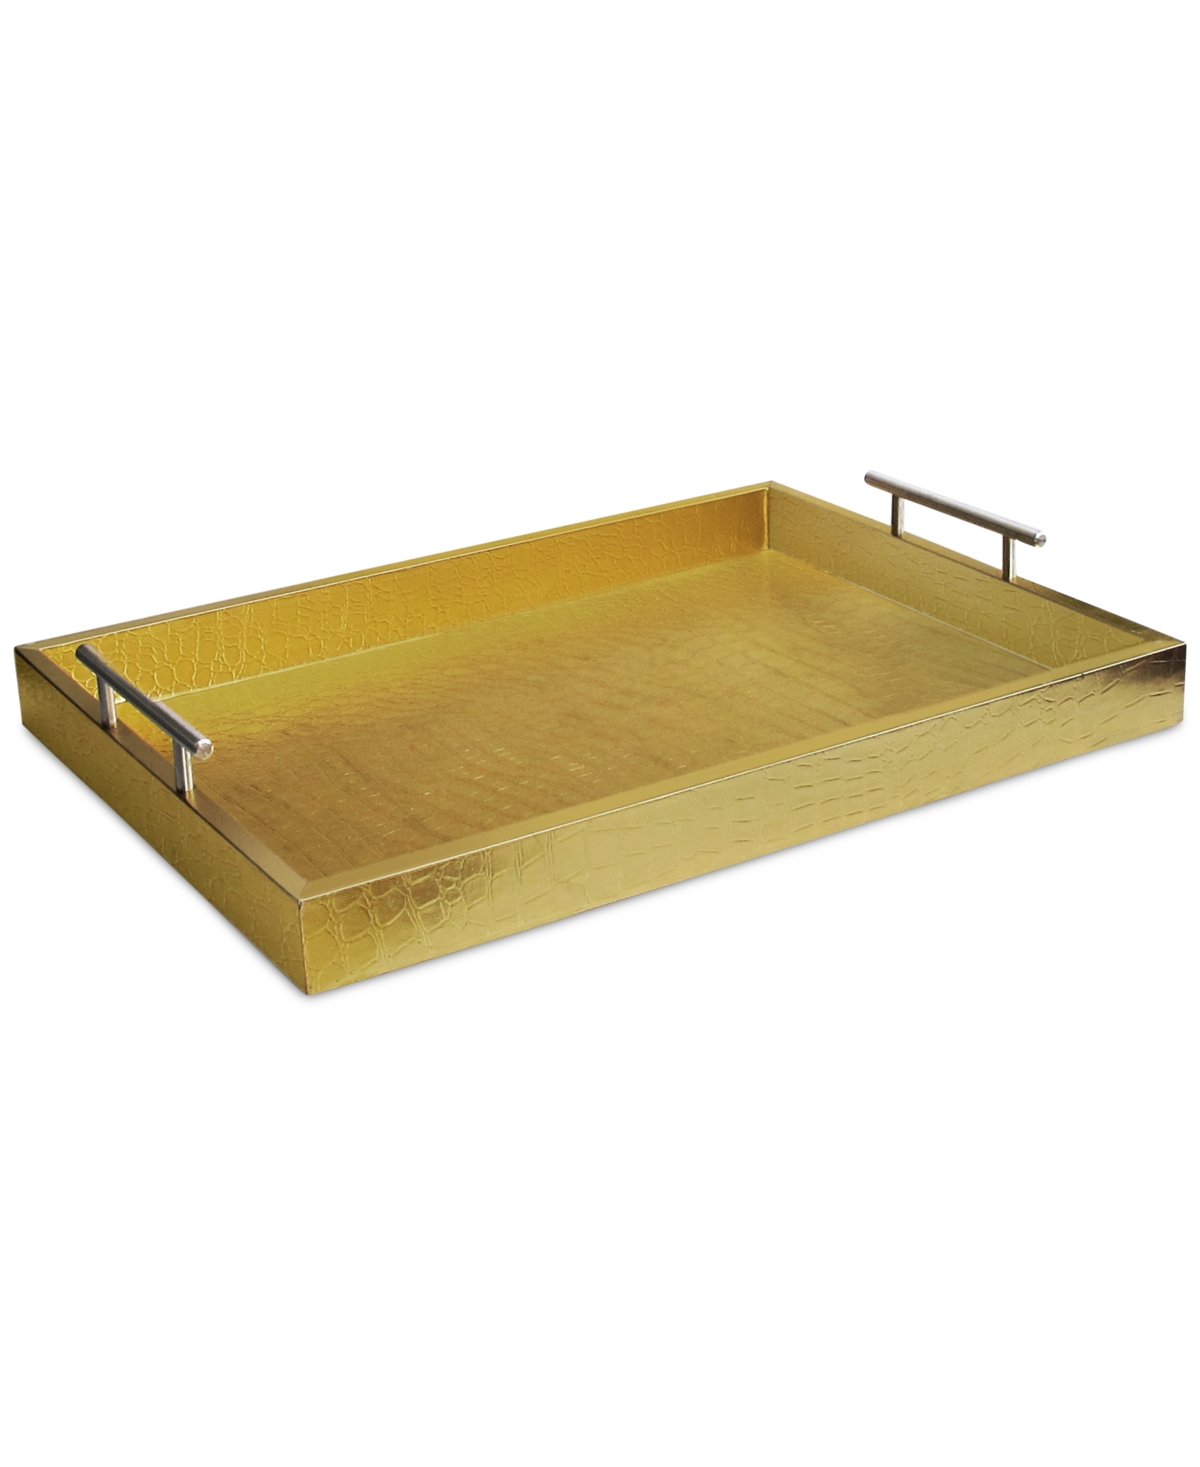 Jay Imports Alligator-embossed Tray With Metal Handles In Gold